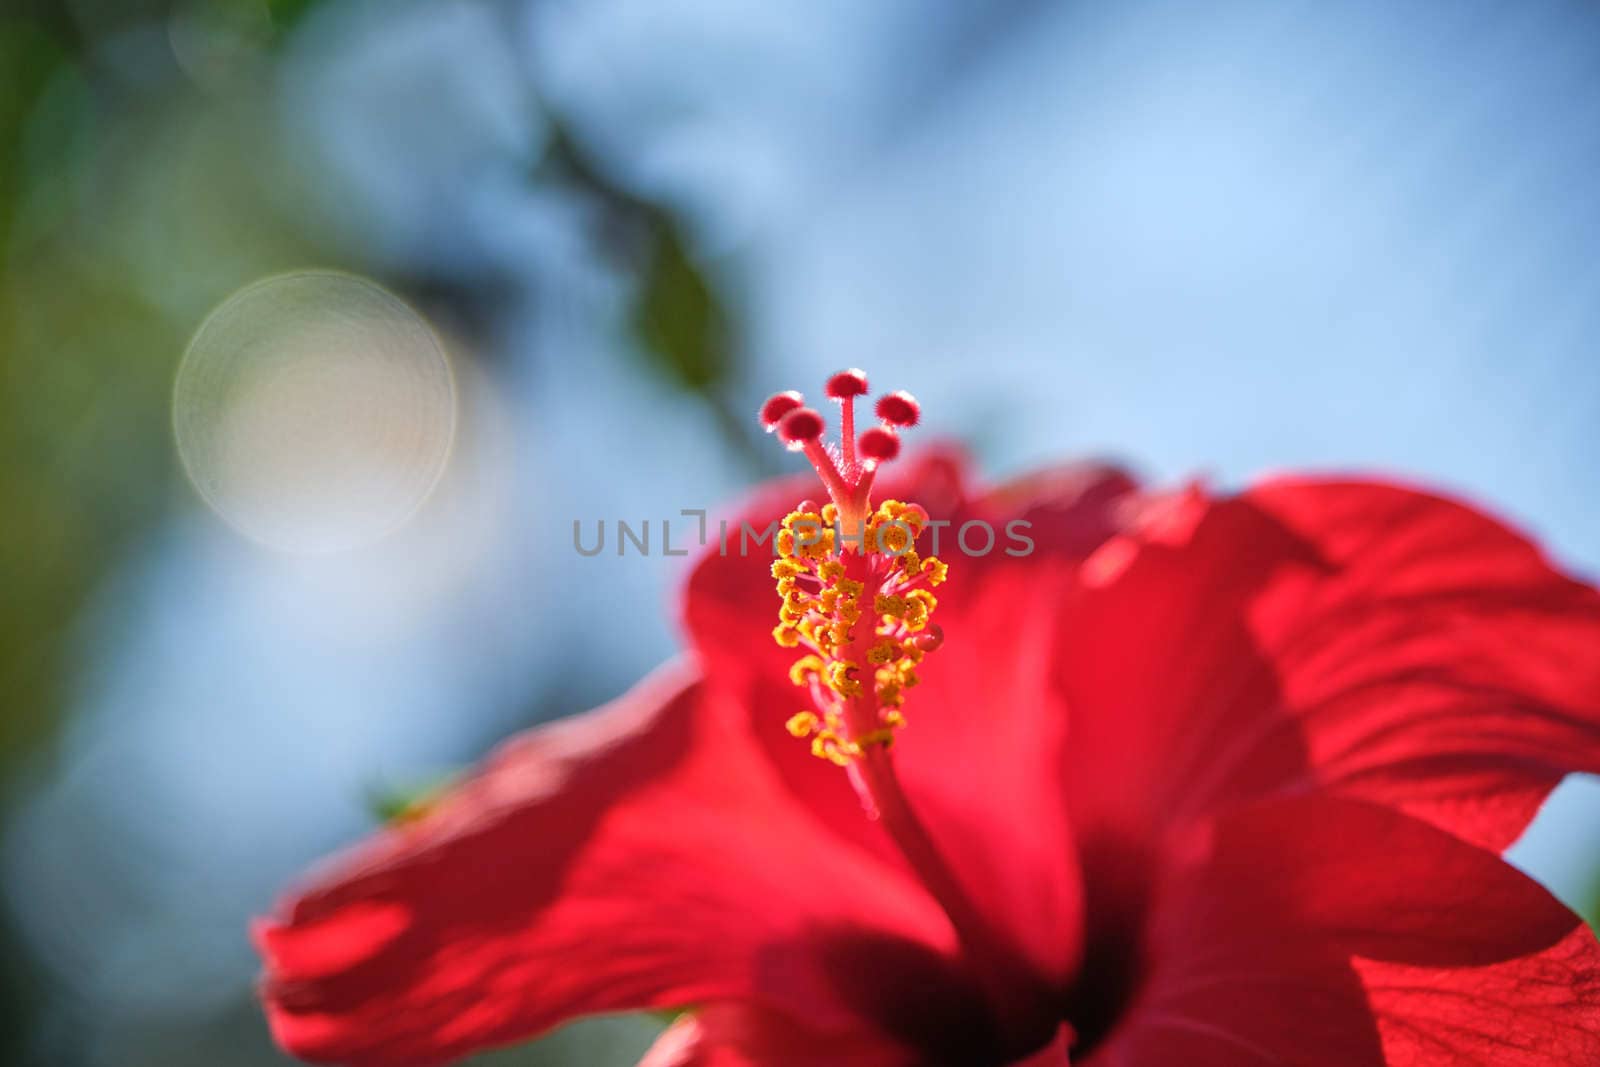 The Red Hibiscus flower China rose,Chinese hibiscus,Hawaiian hibiscus in tropical garden of Tenerife,Canary Islands,Spain.Floral ba. Ckground.Selective focus